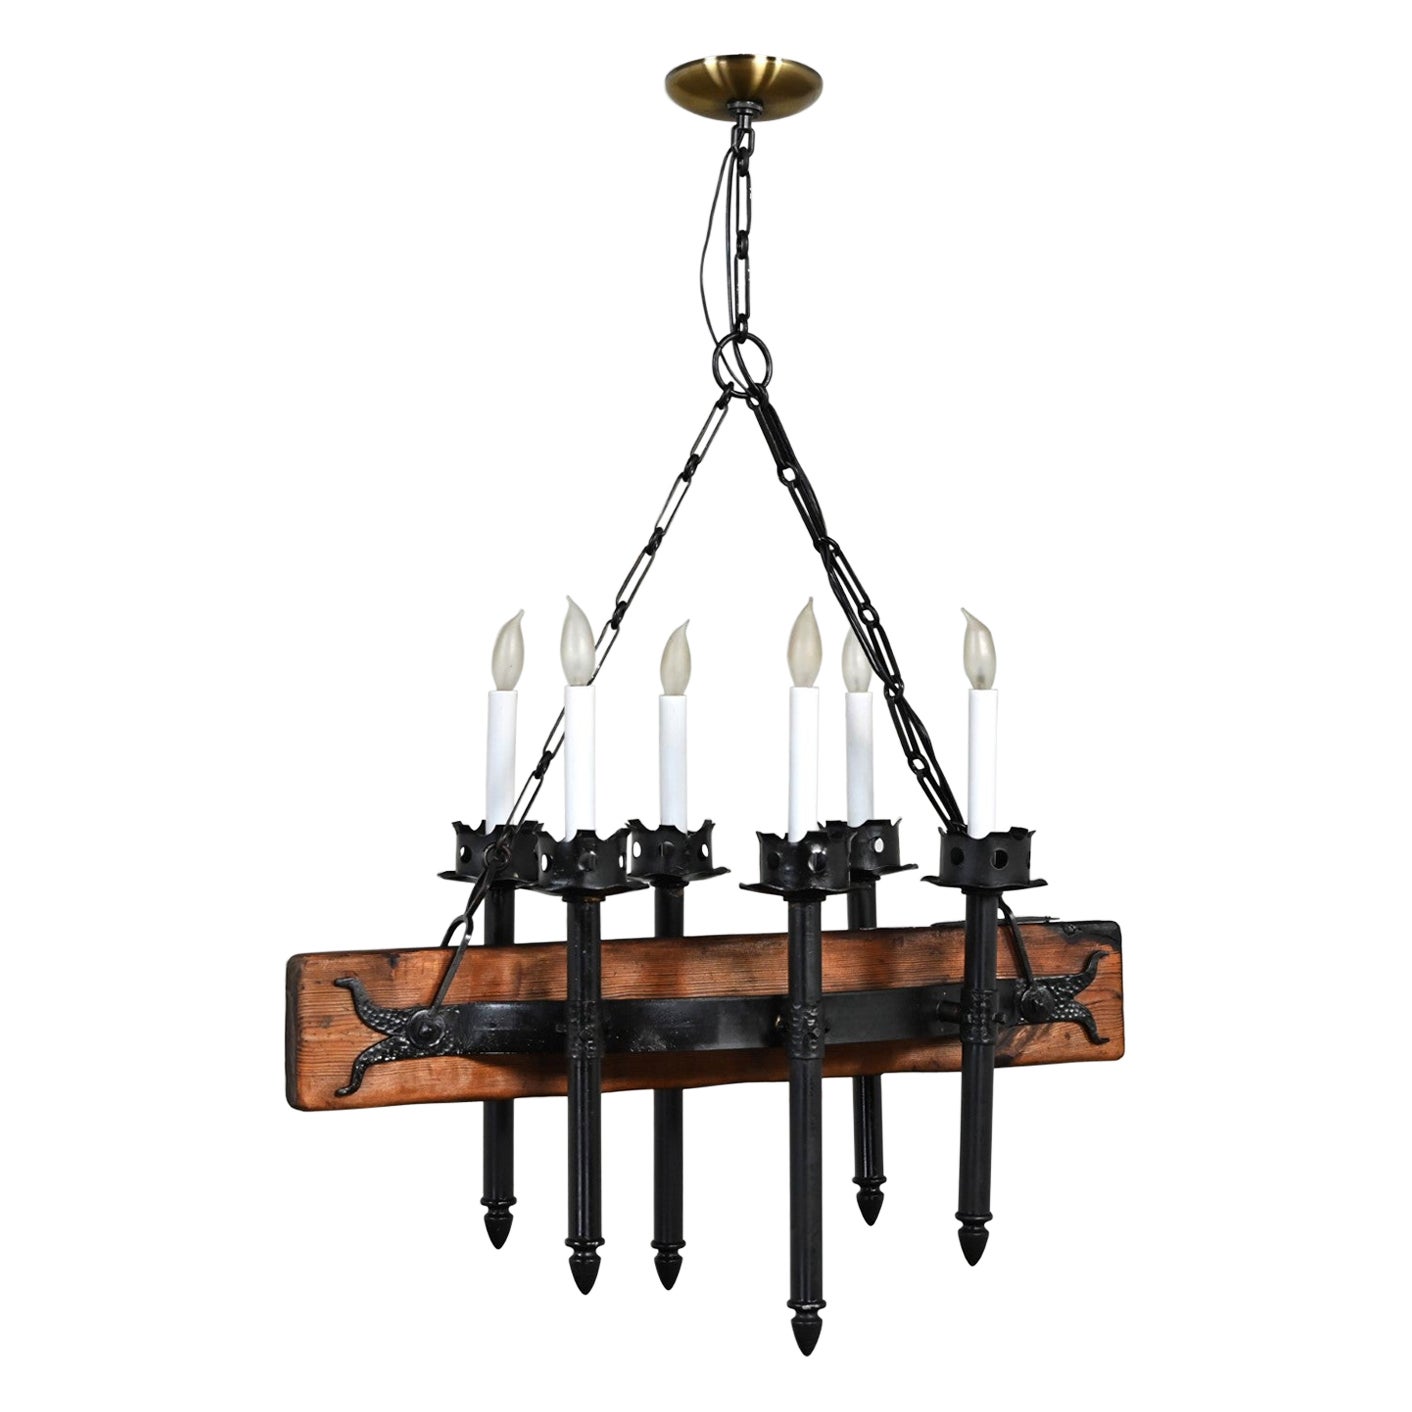 Medieval Gothic Spanish Revival Iron & Wood Beam Hanging Light Fixture Mexico